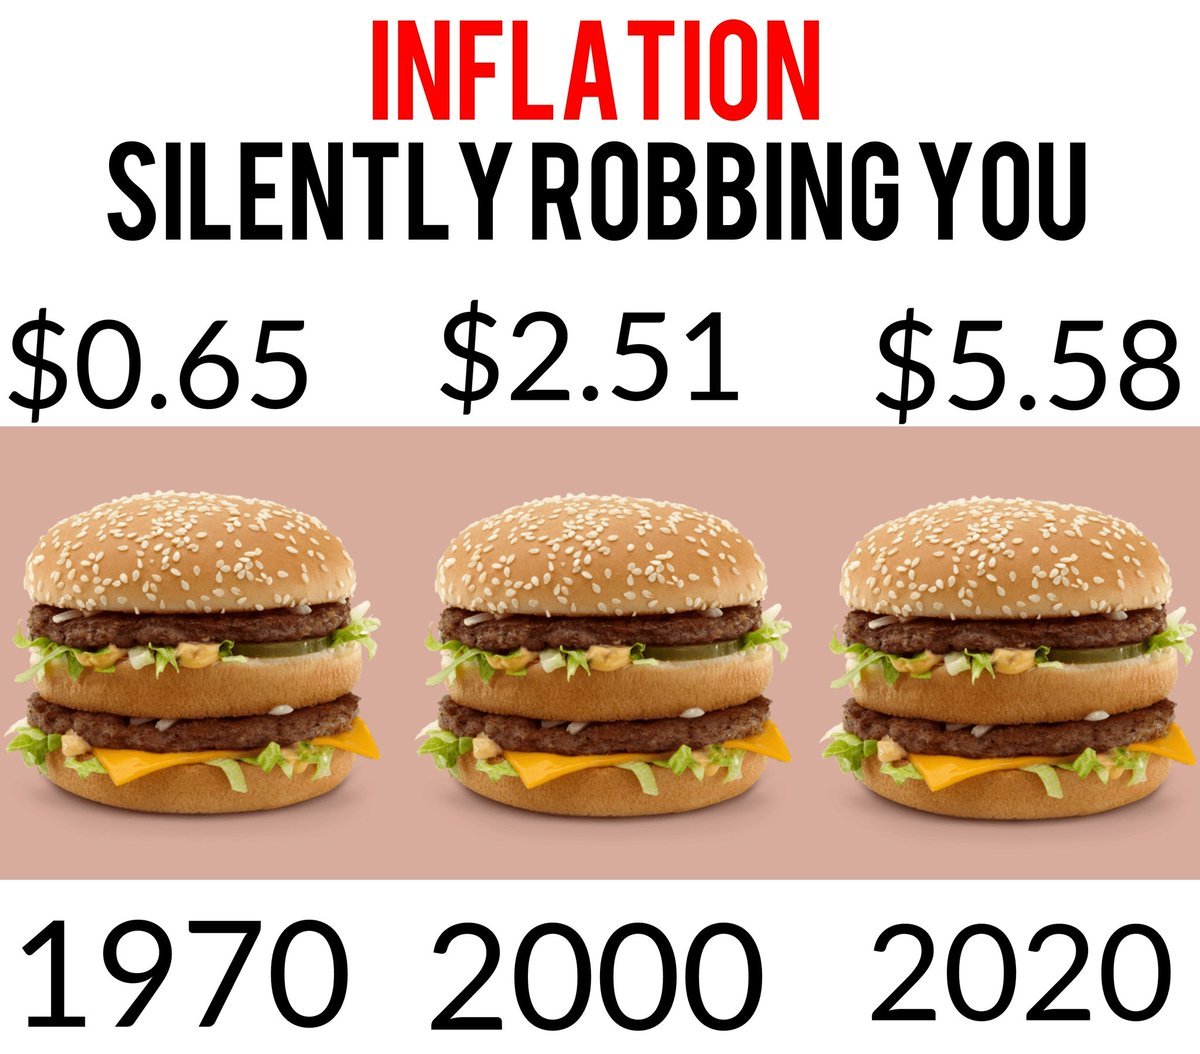 Inflation is why you must invest